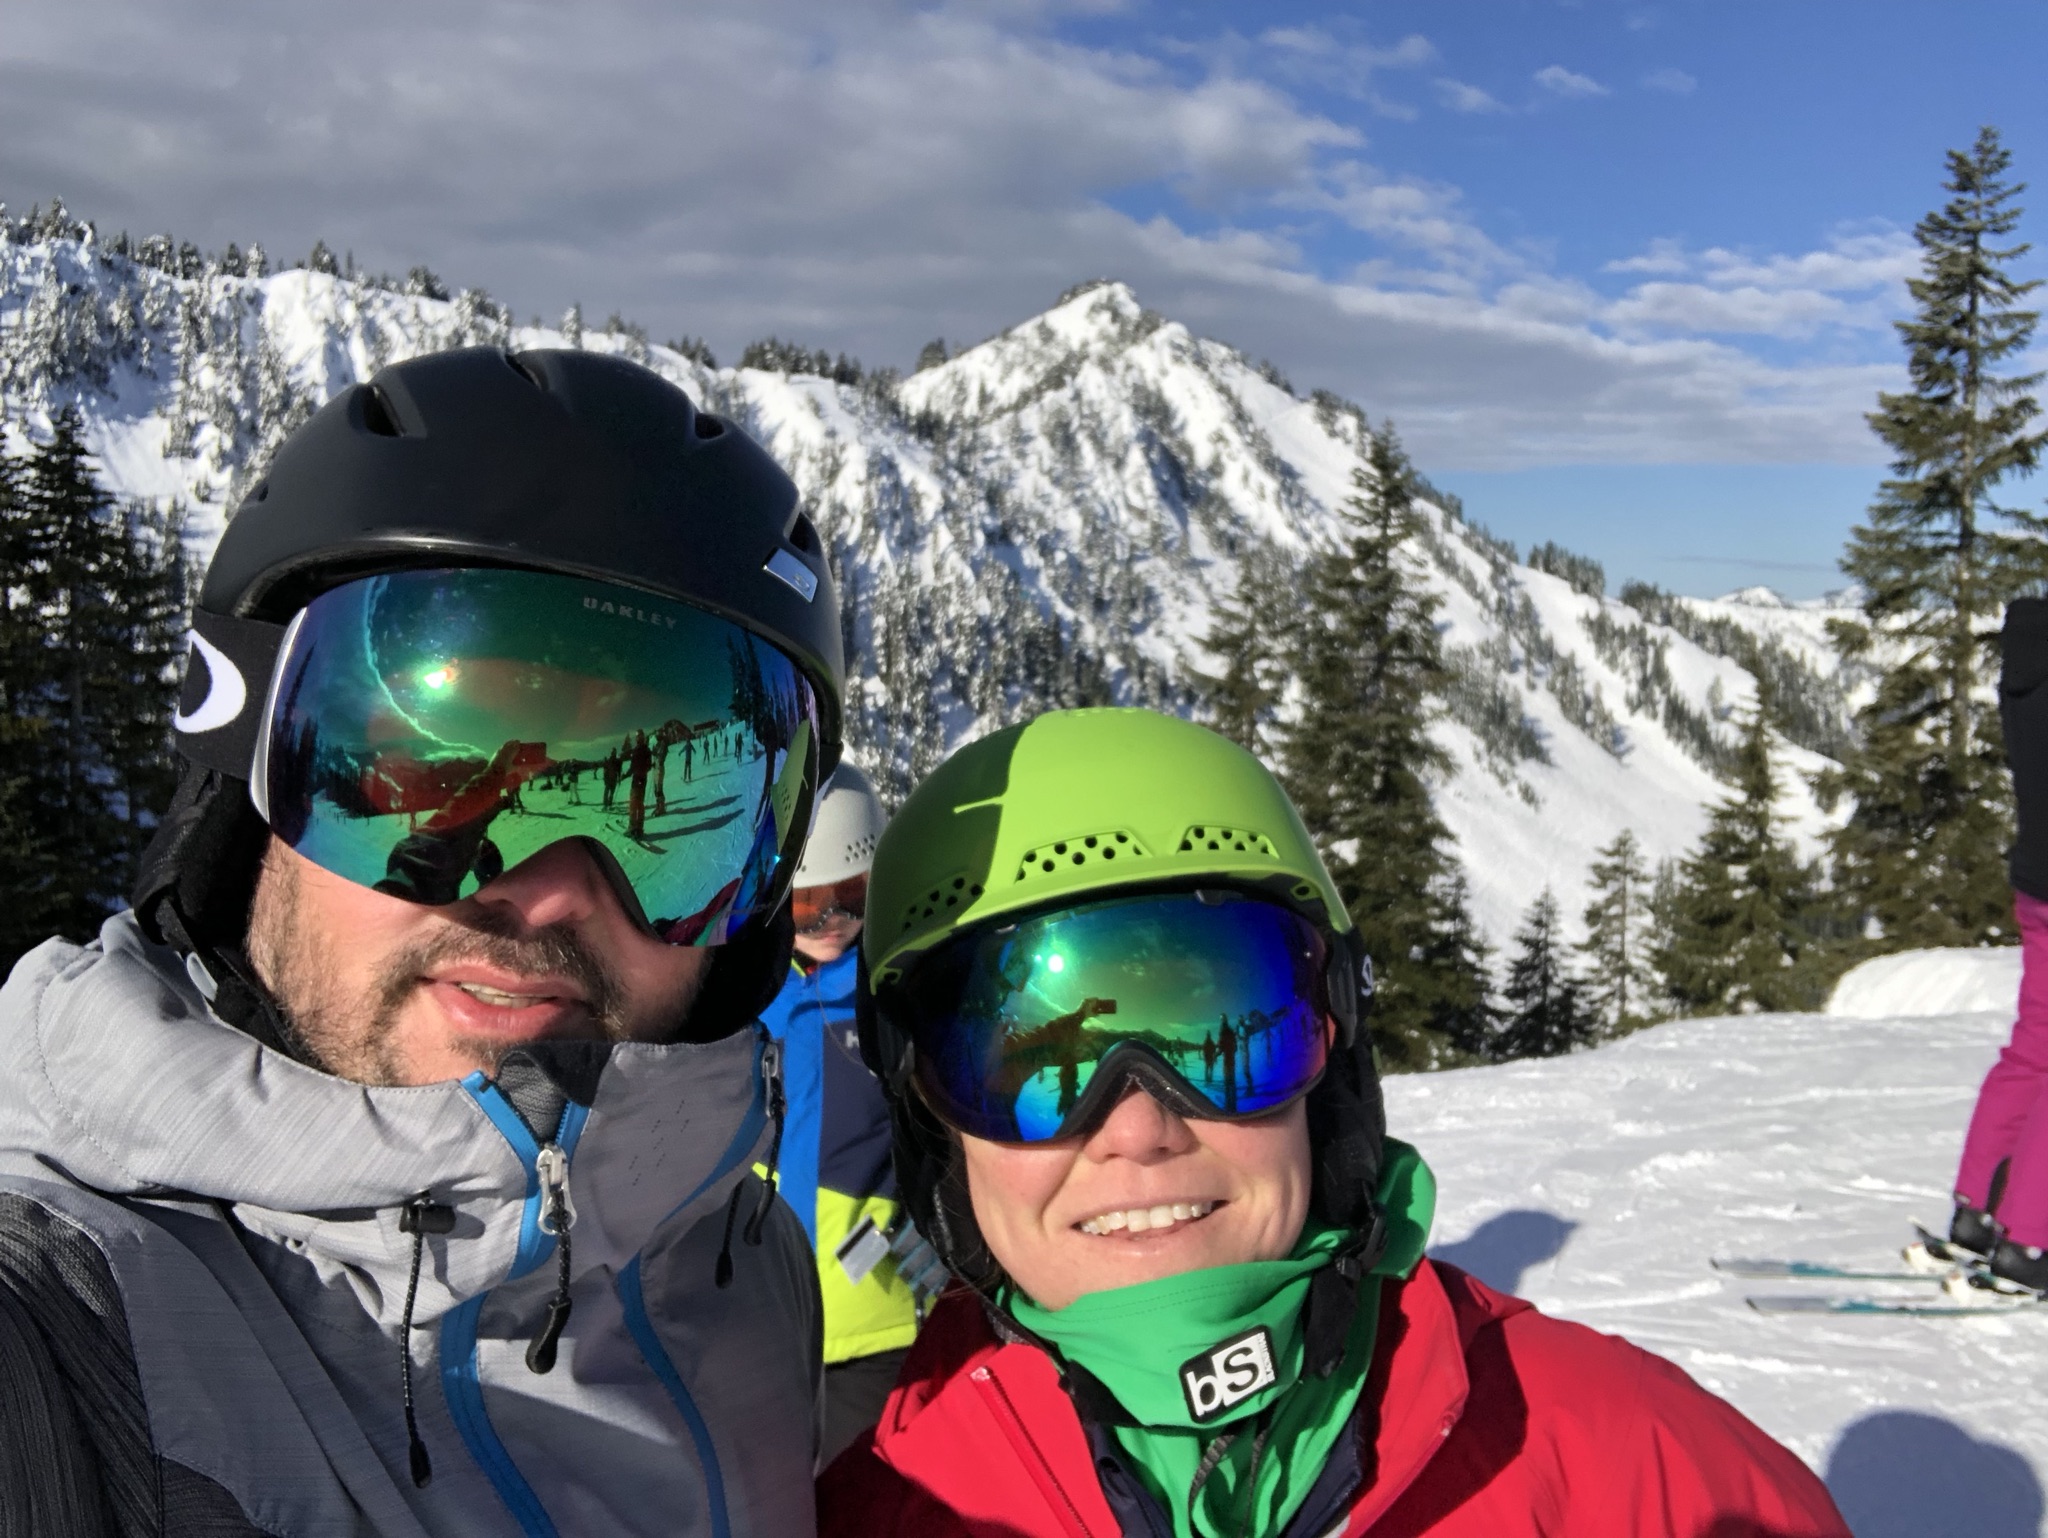 Skiing at the Stevens Pass